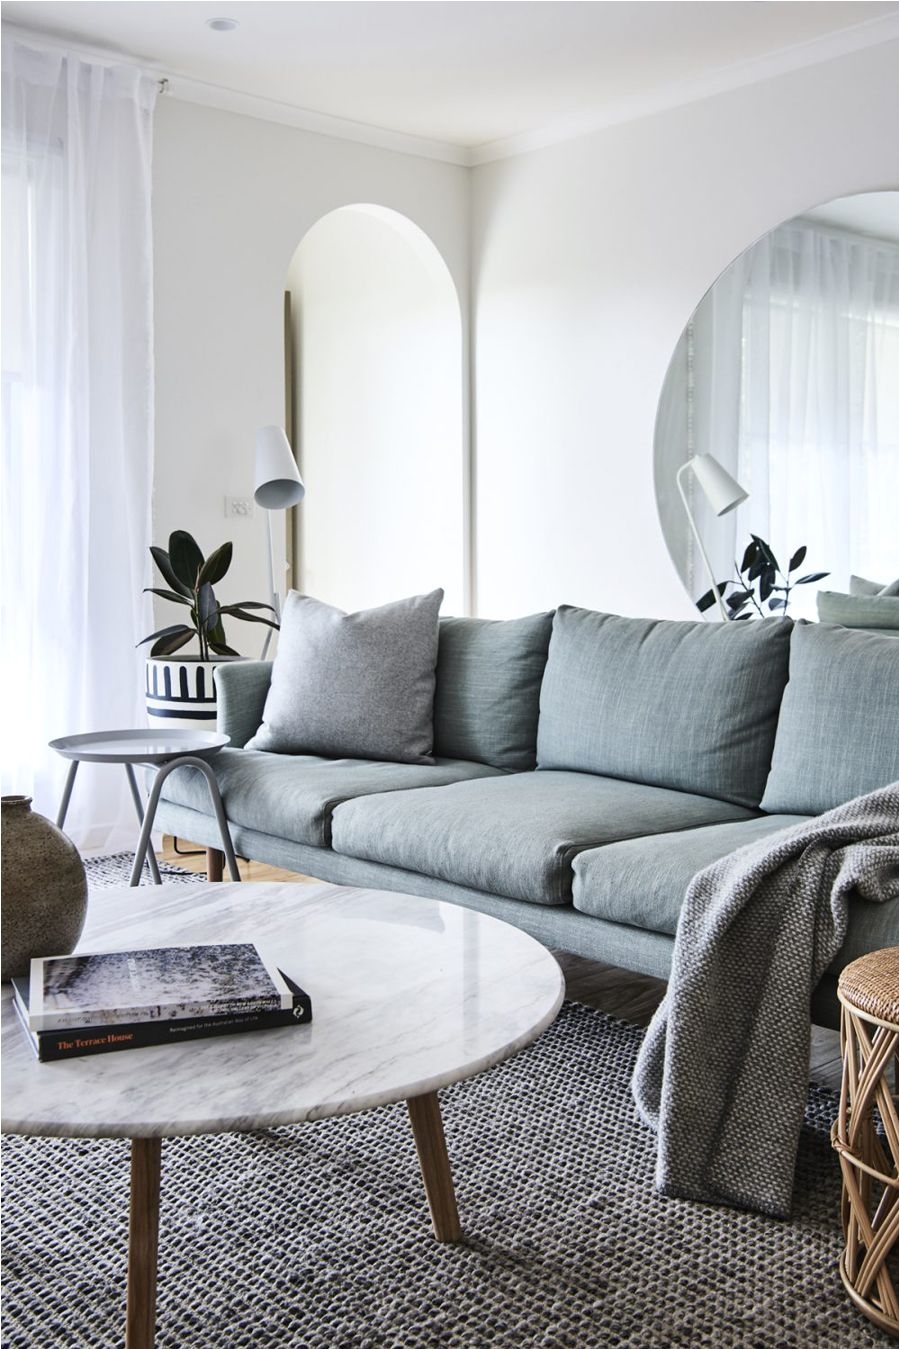 White Marble table with muted blue couch Living edor Living Room Interior Home Living